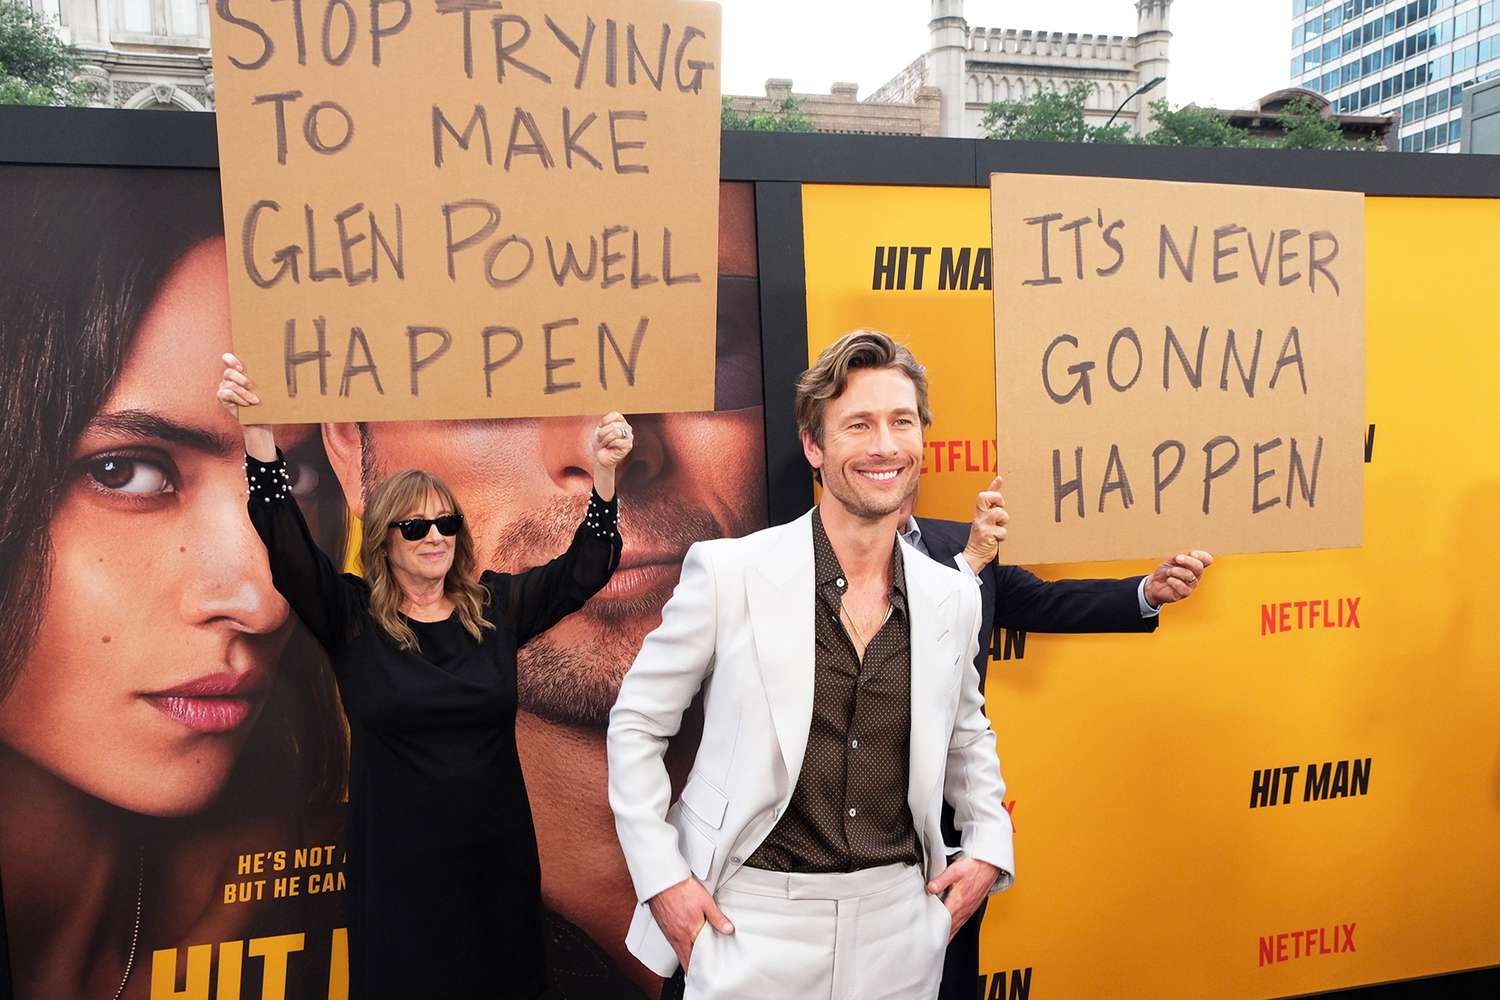 Glen Powell's parents want you to stop trying to make Glen Powell happen